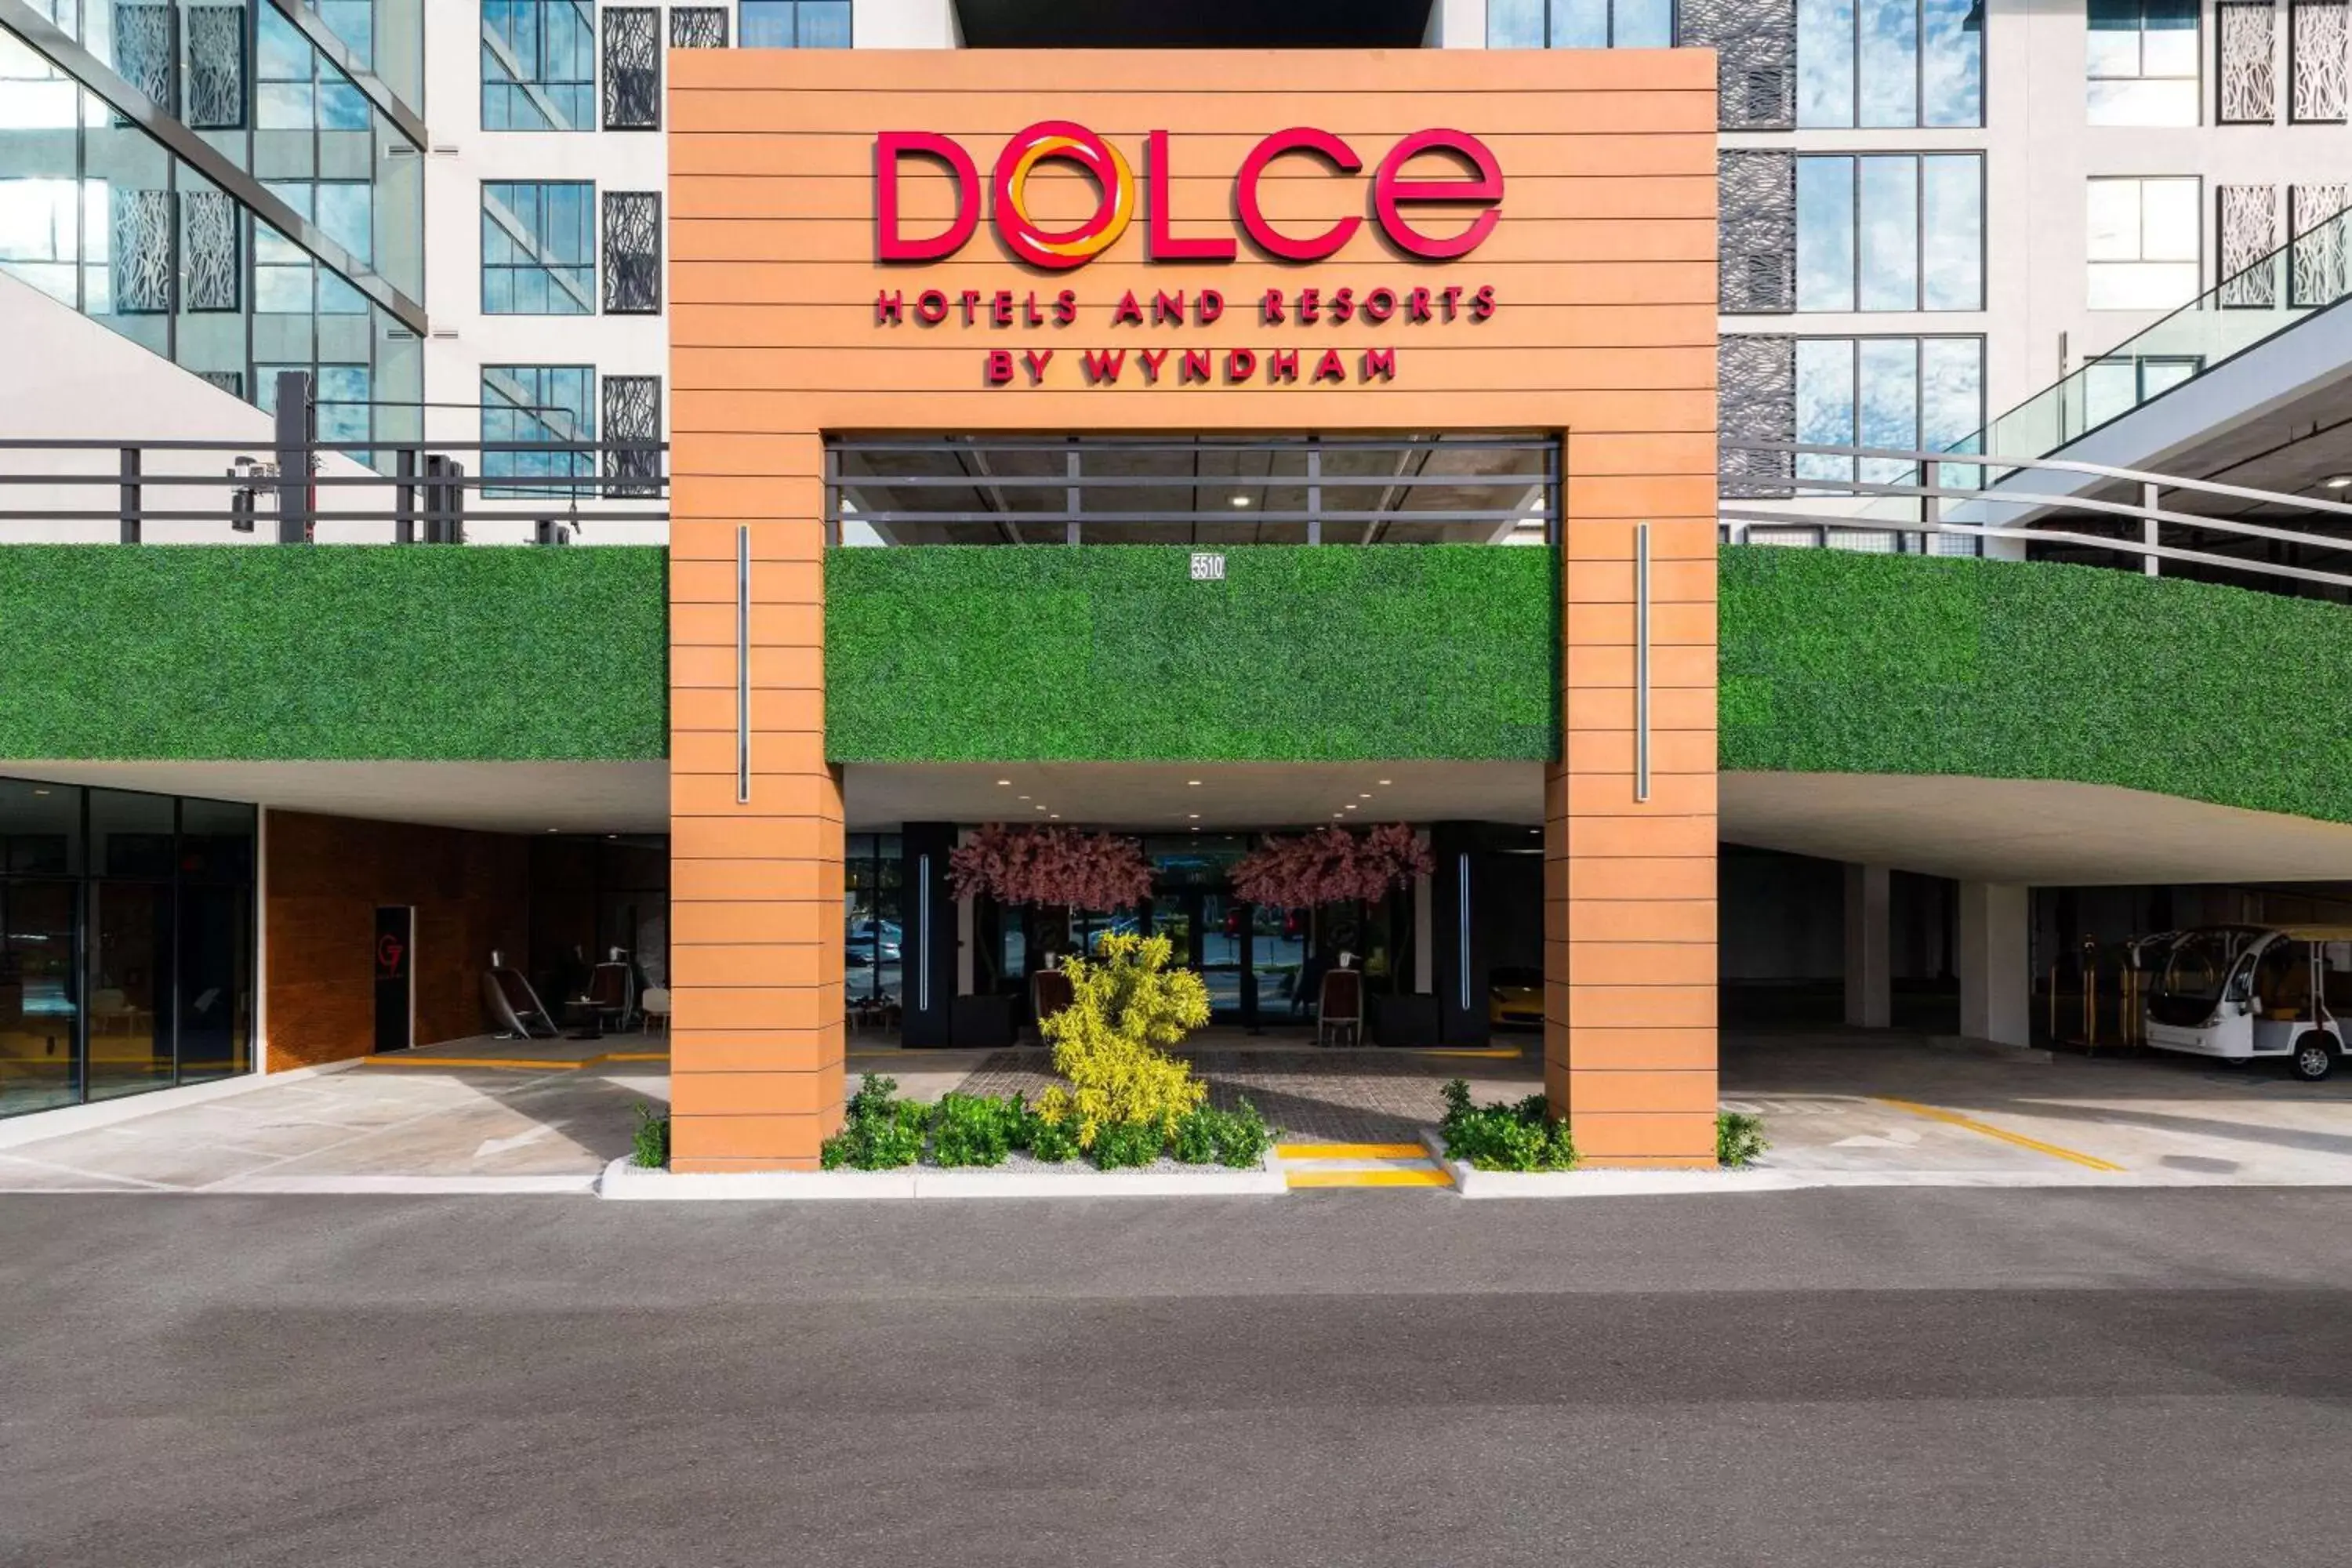 Property building in Dolce by Wyndham Hollywood